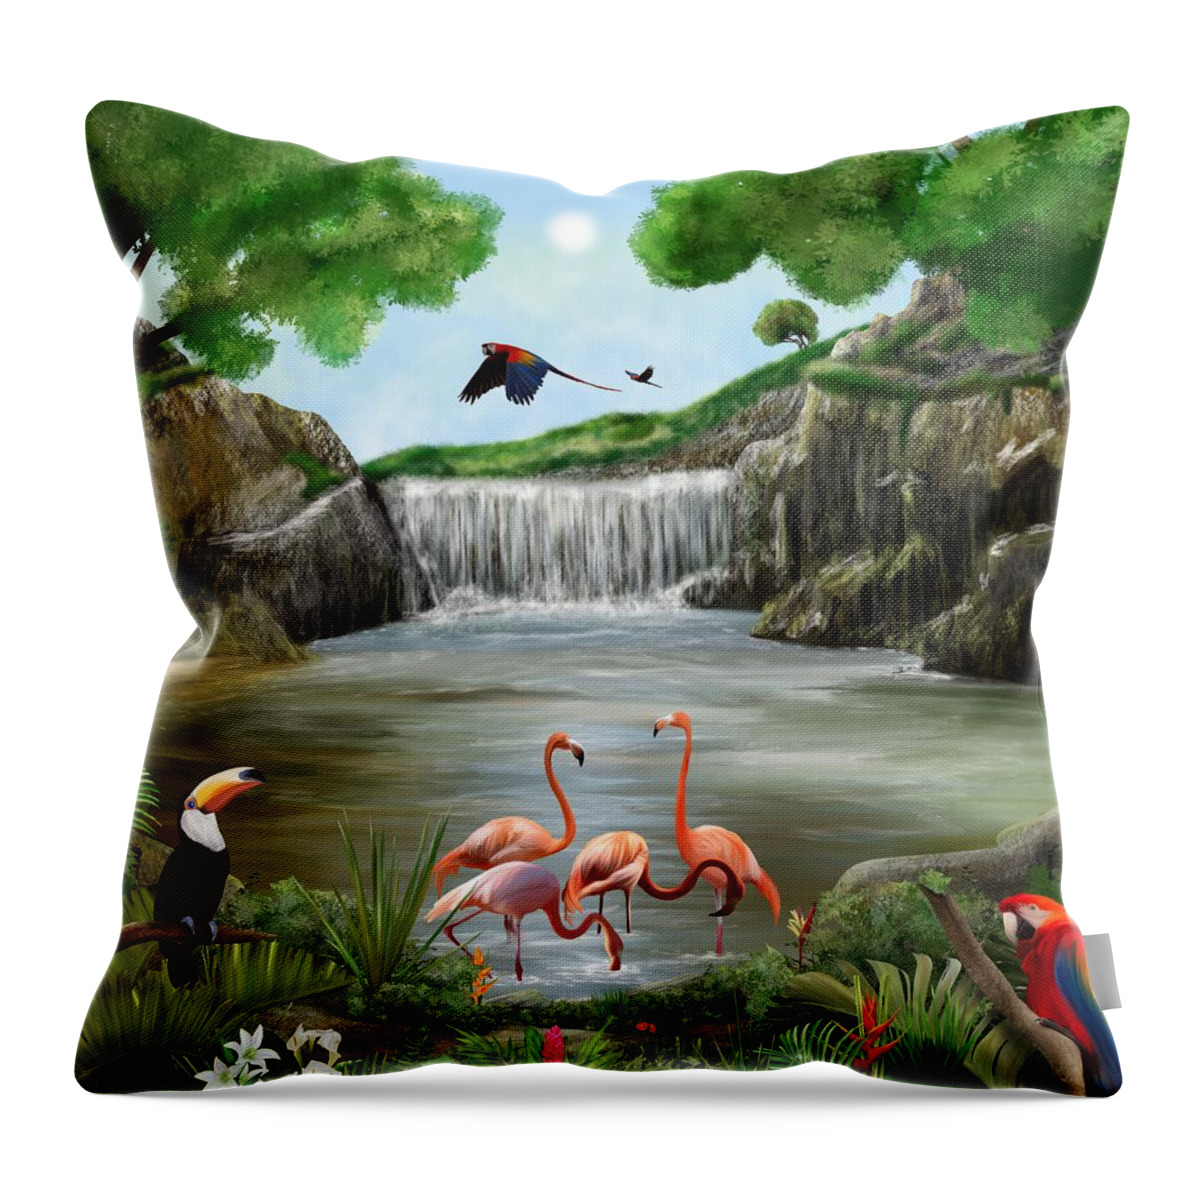 Pool Party Throw Pillow featuring the digital art Pool Party by Mark Taylor